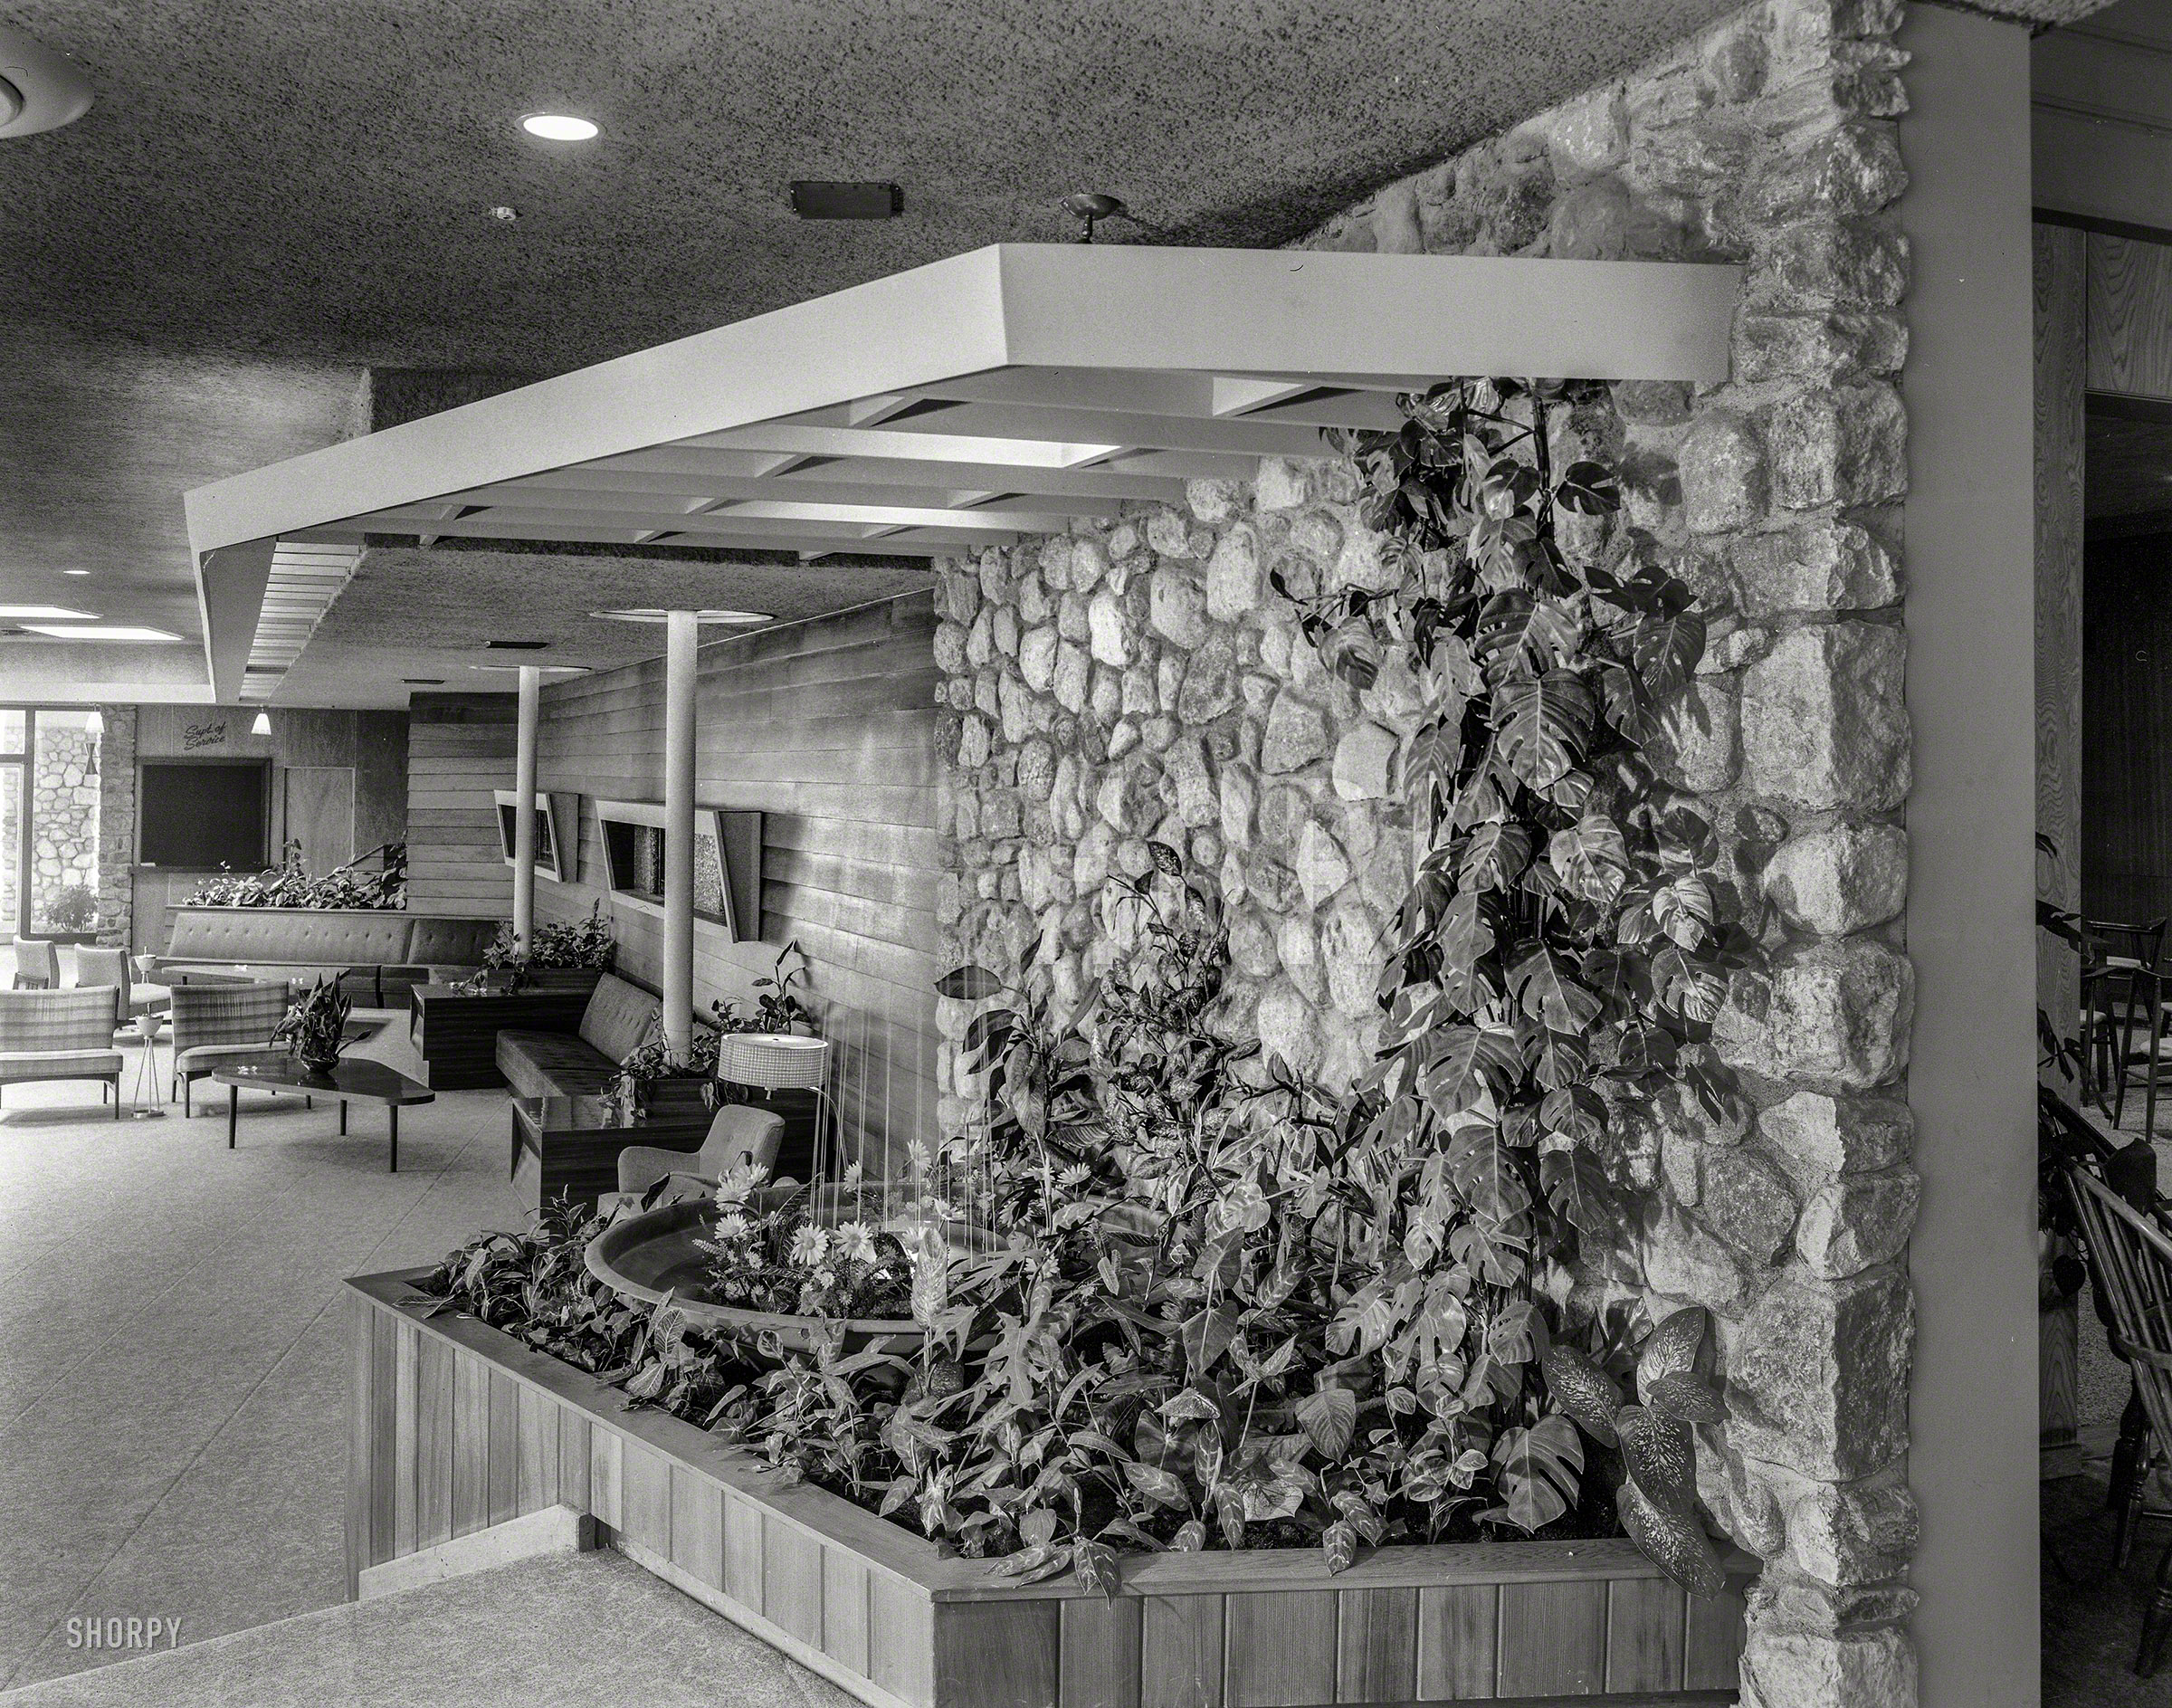 August 13, 1957. "Tamarack Lodge, Greenfield Park, New York. Lobby to fountain." Large-format acetate negative by Gottscho-Schleisner. View full size.